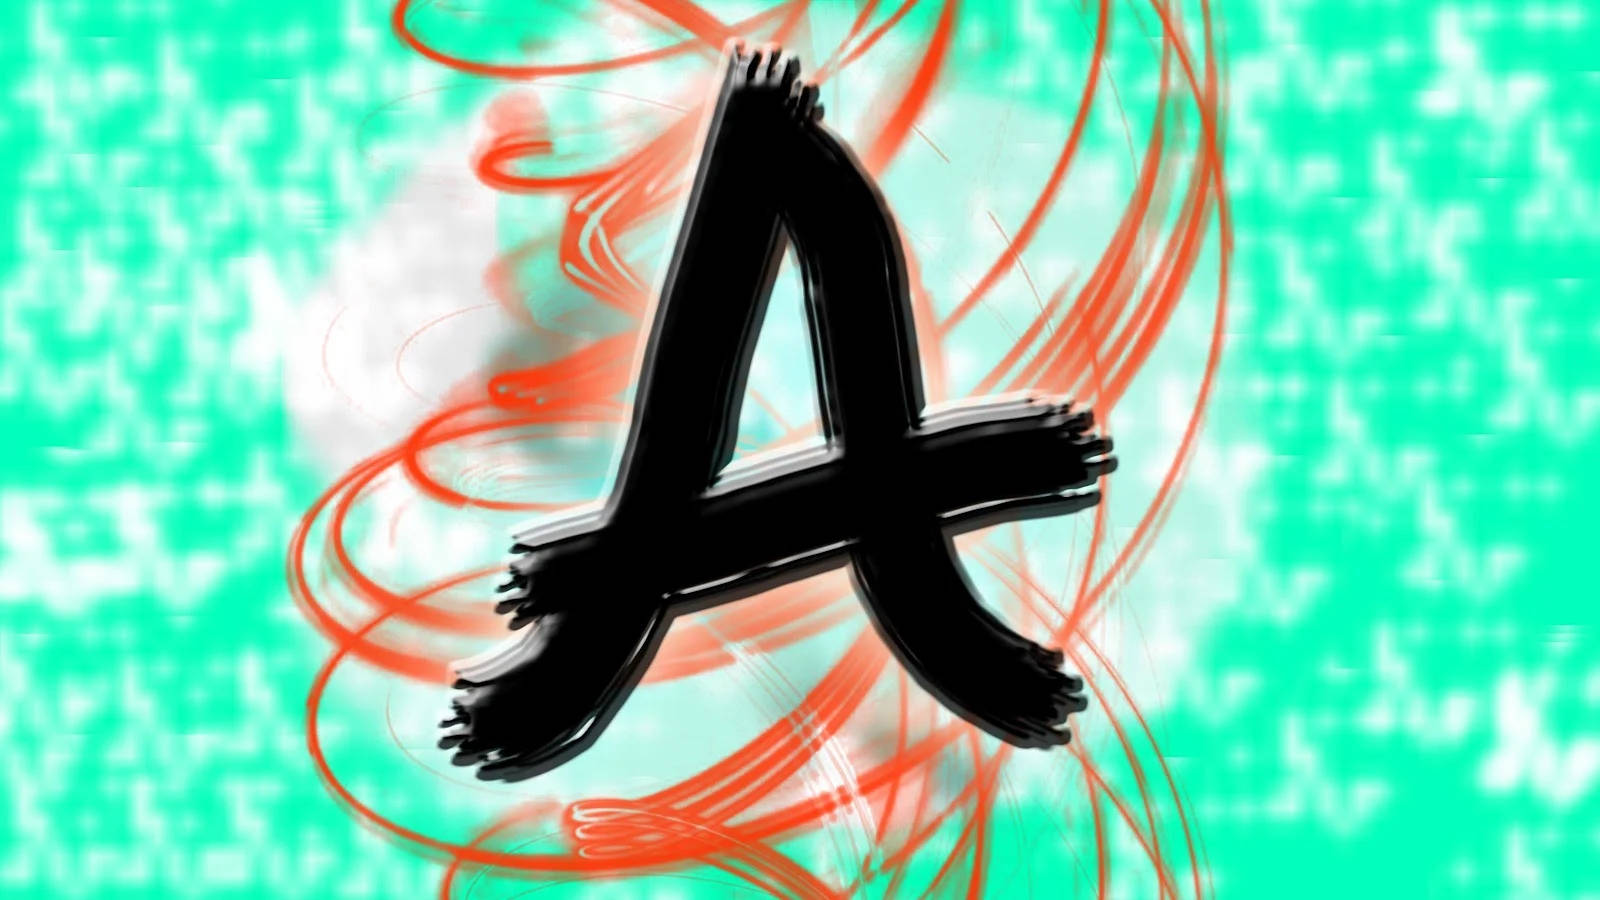 Letter A With Spiral Orange Line Picture